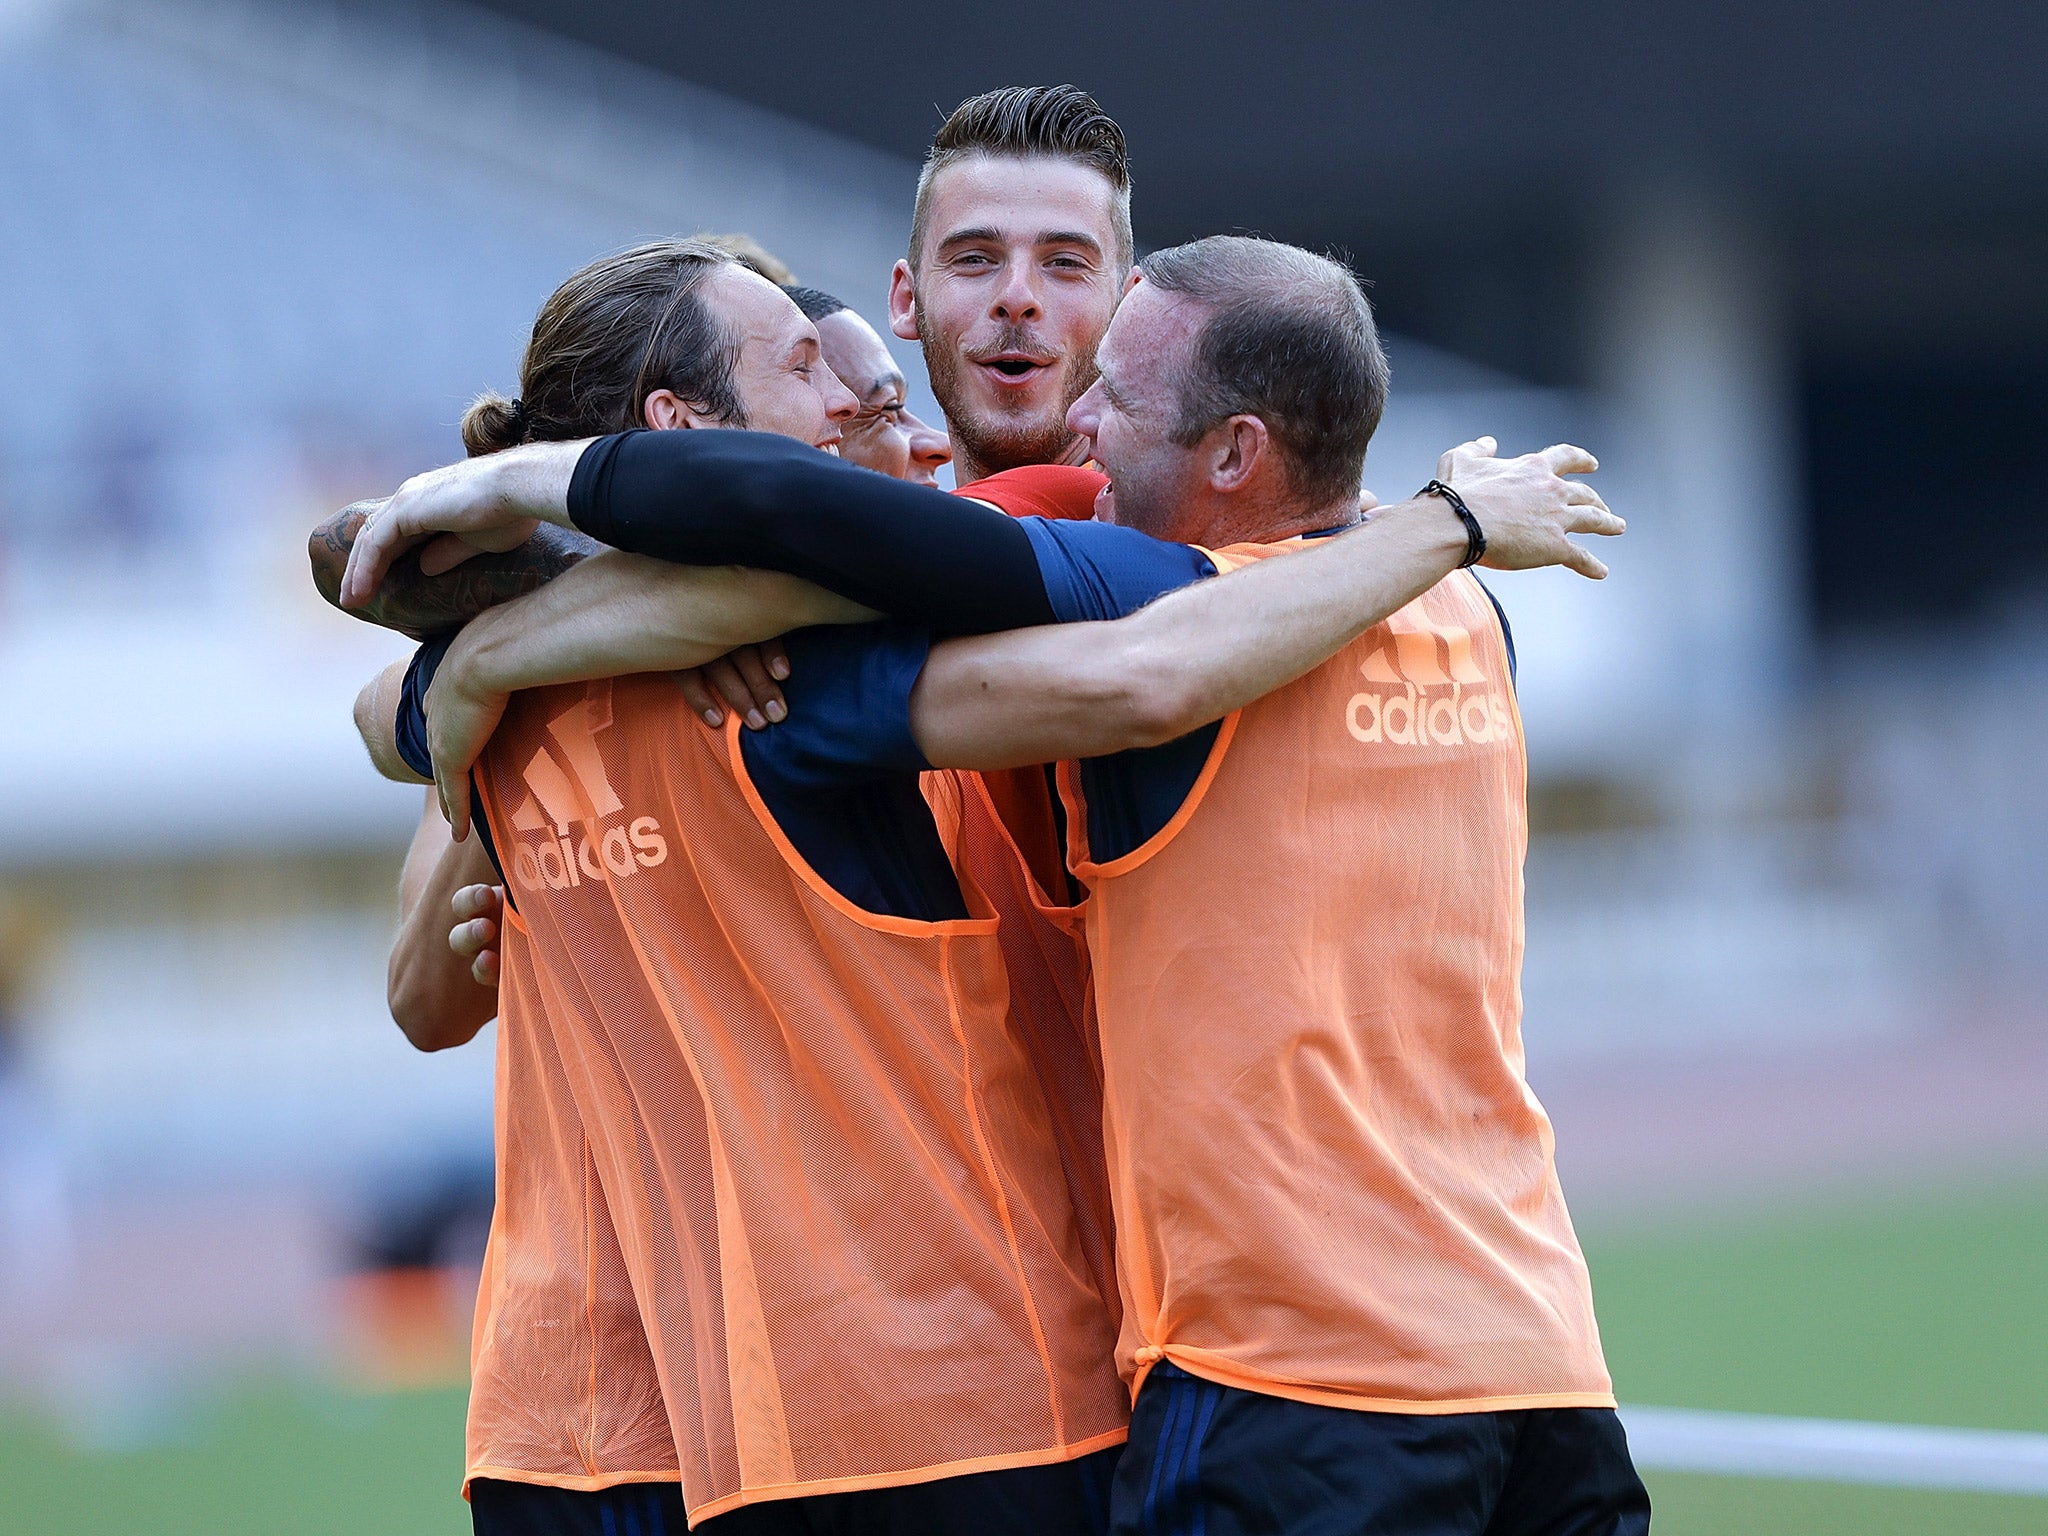 Manchester United players embrace during a training session on their pre-season tour of China